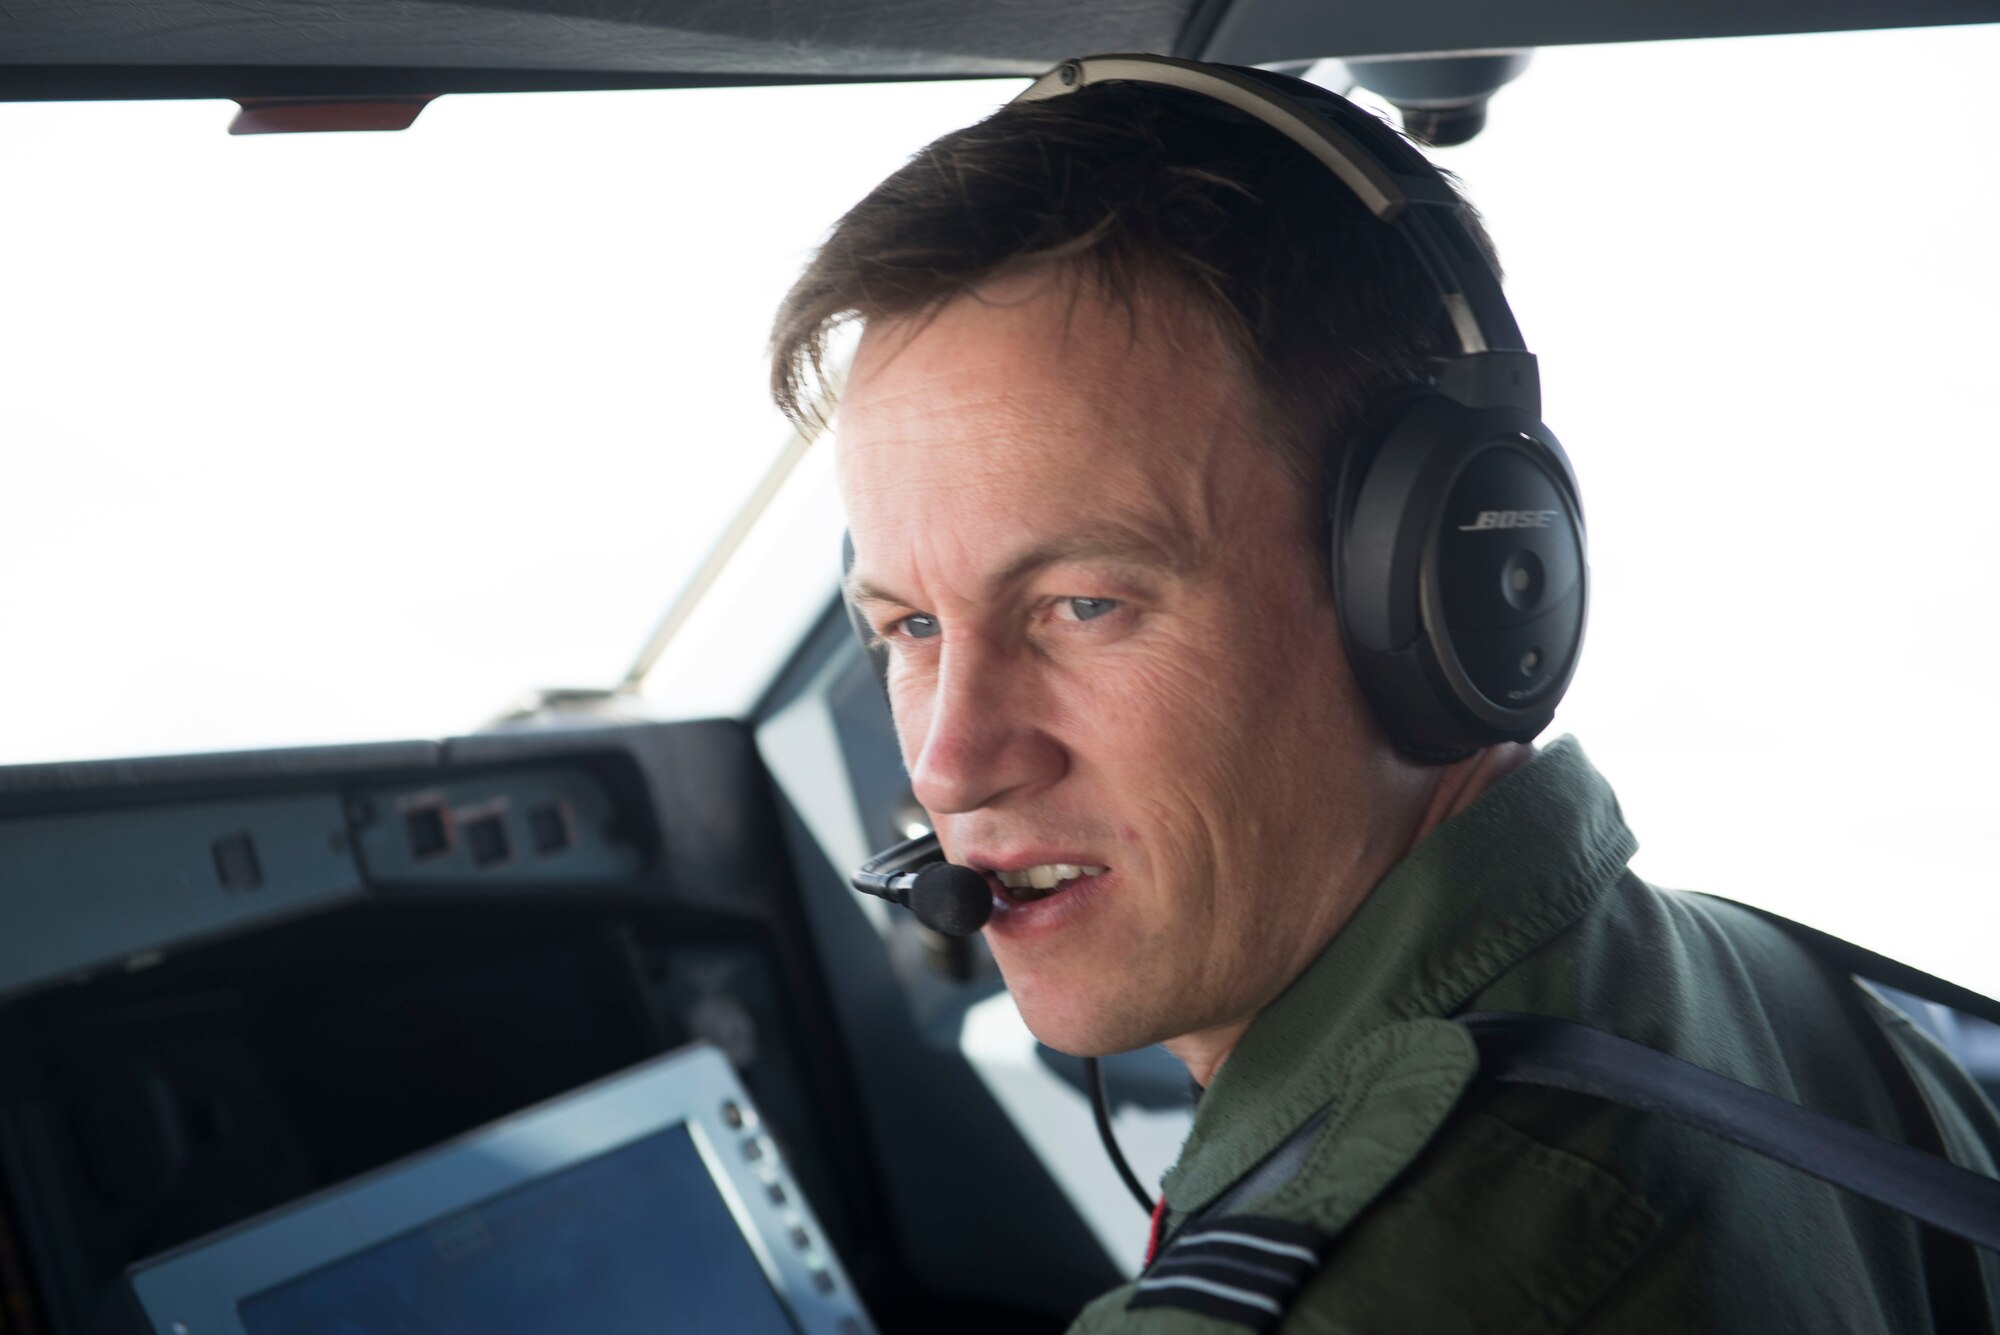 Royal Air Force Flight Lt. James West co-pilots the RAF Voyager over the North Sea during European Tanker Symposium, May 17, 2018. The symposium is an annual event where NATO allies and partner nations with an interest in air refueling capabilities gather to discuss tanker formation flights. (U.S. Air Force photo by Airman 1st Class Alexandria Lee)